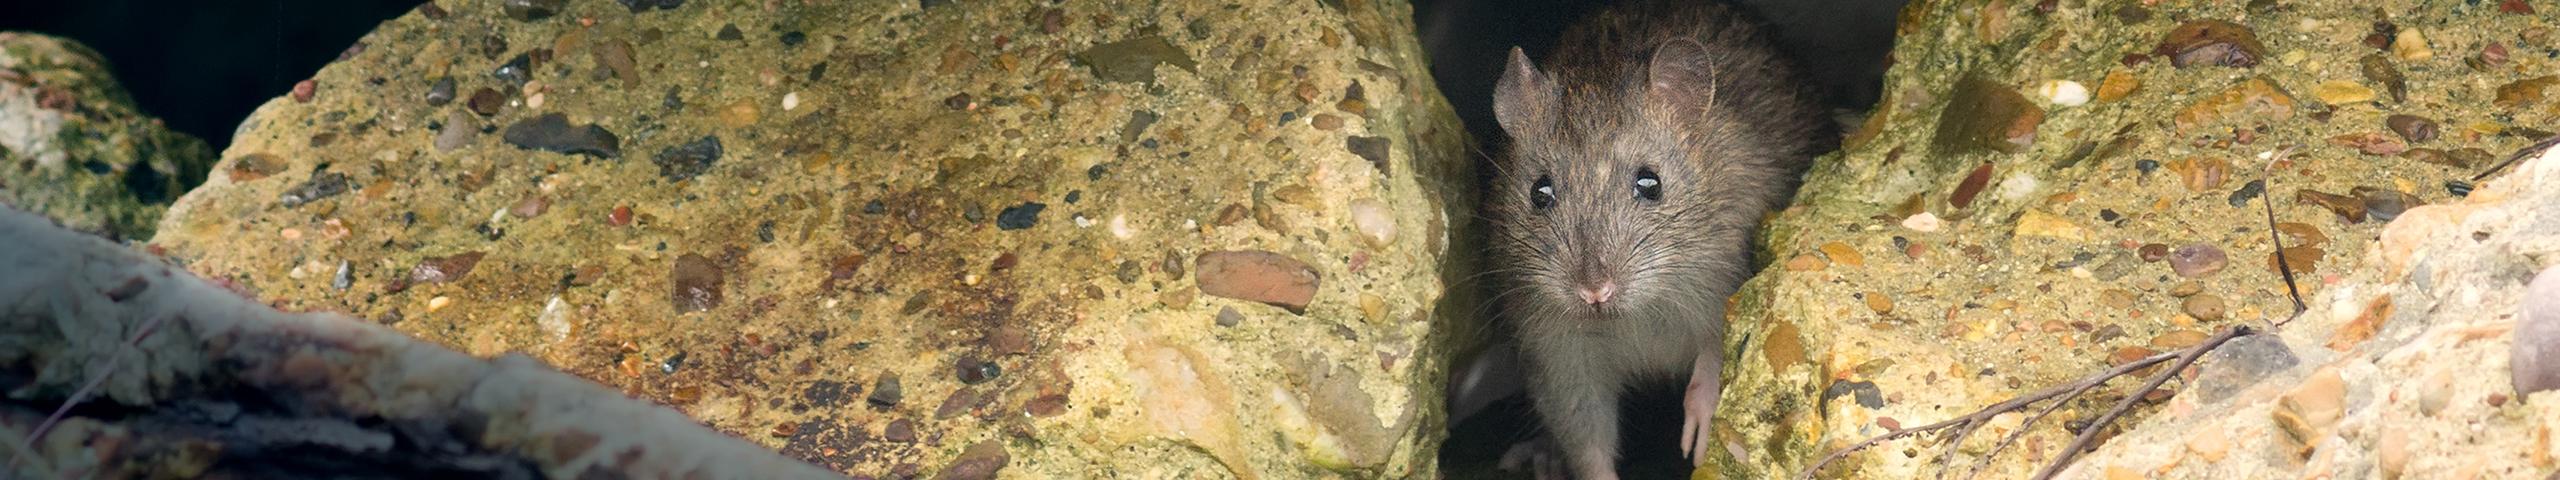 a rat peaking out between two rocks